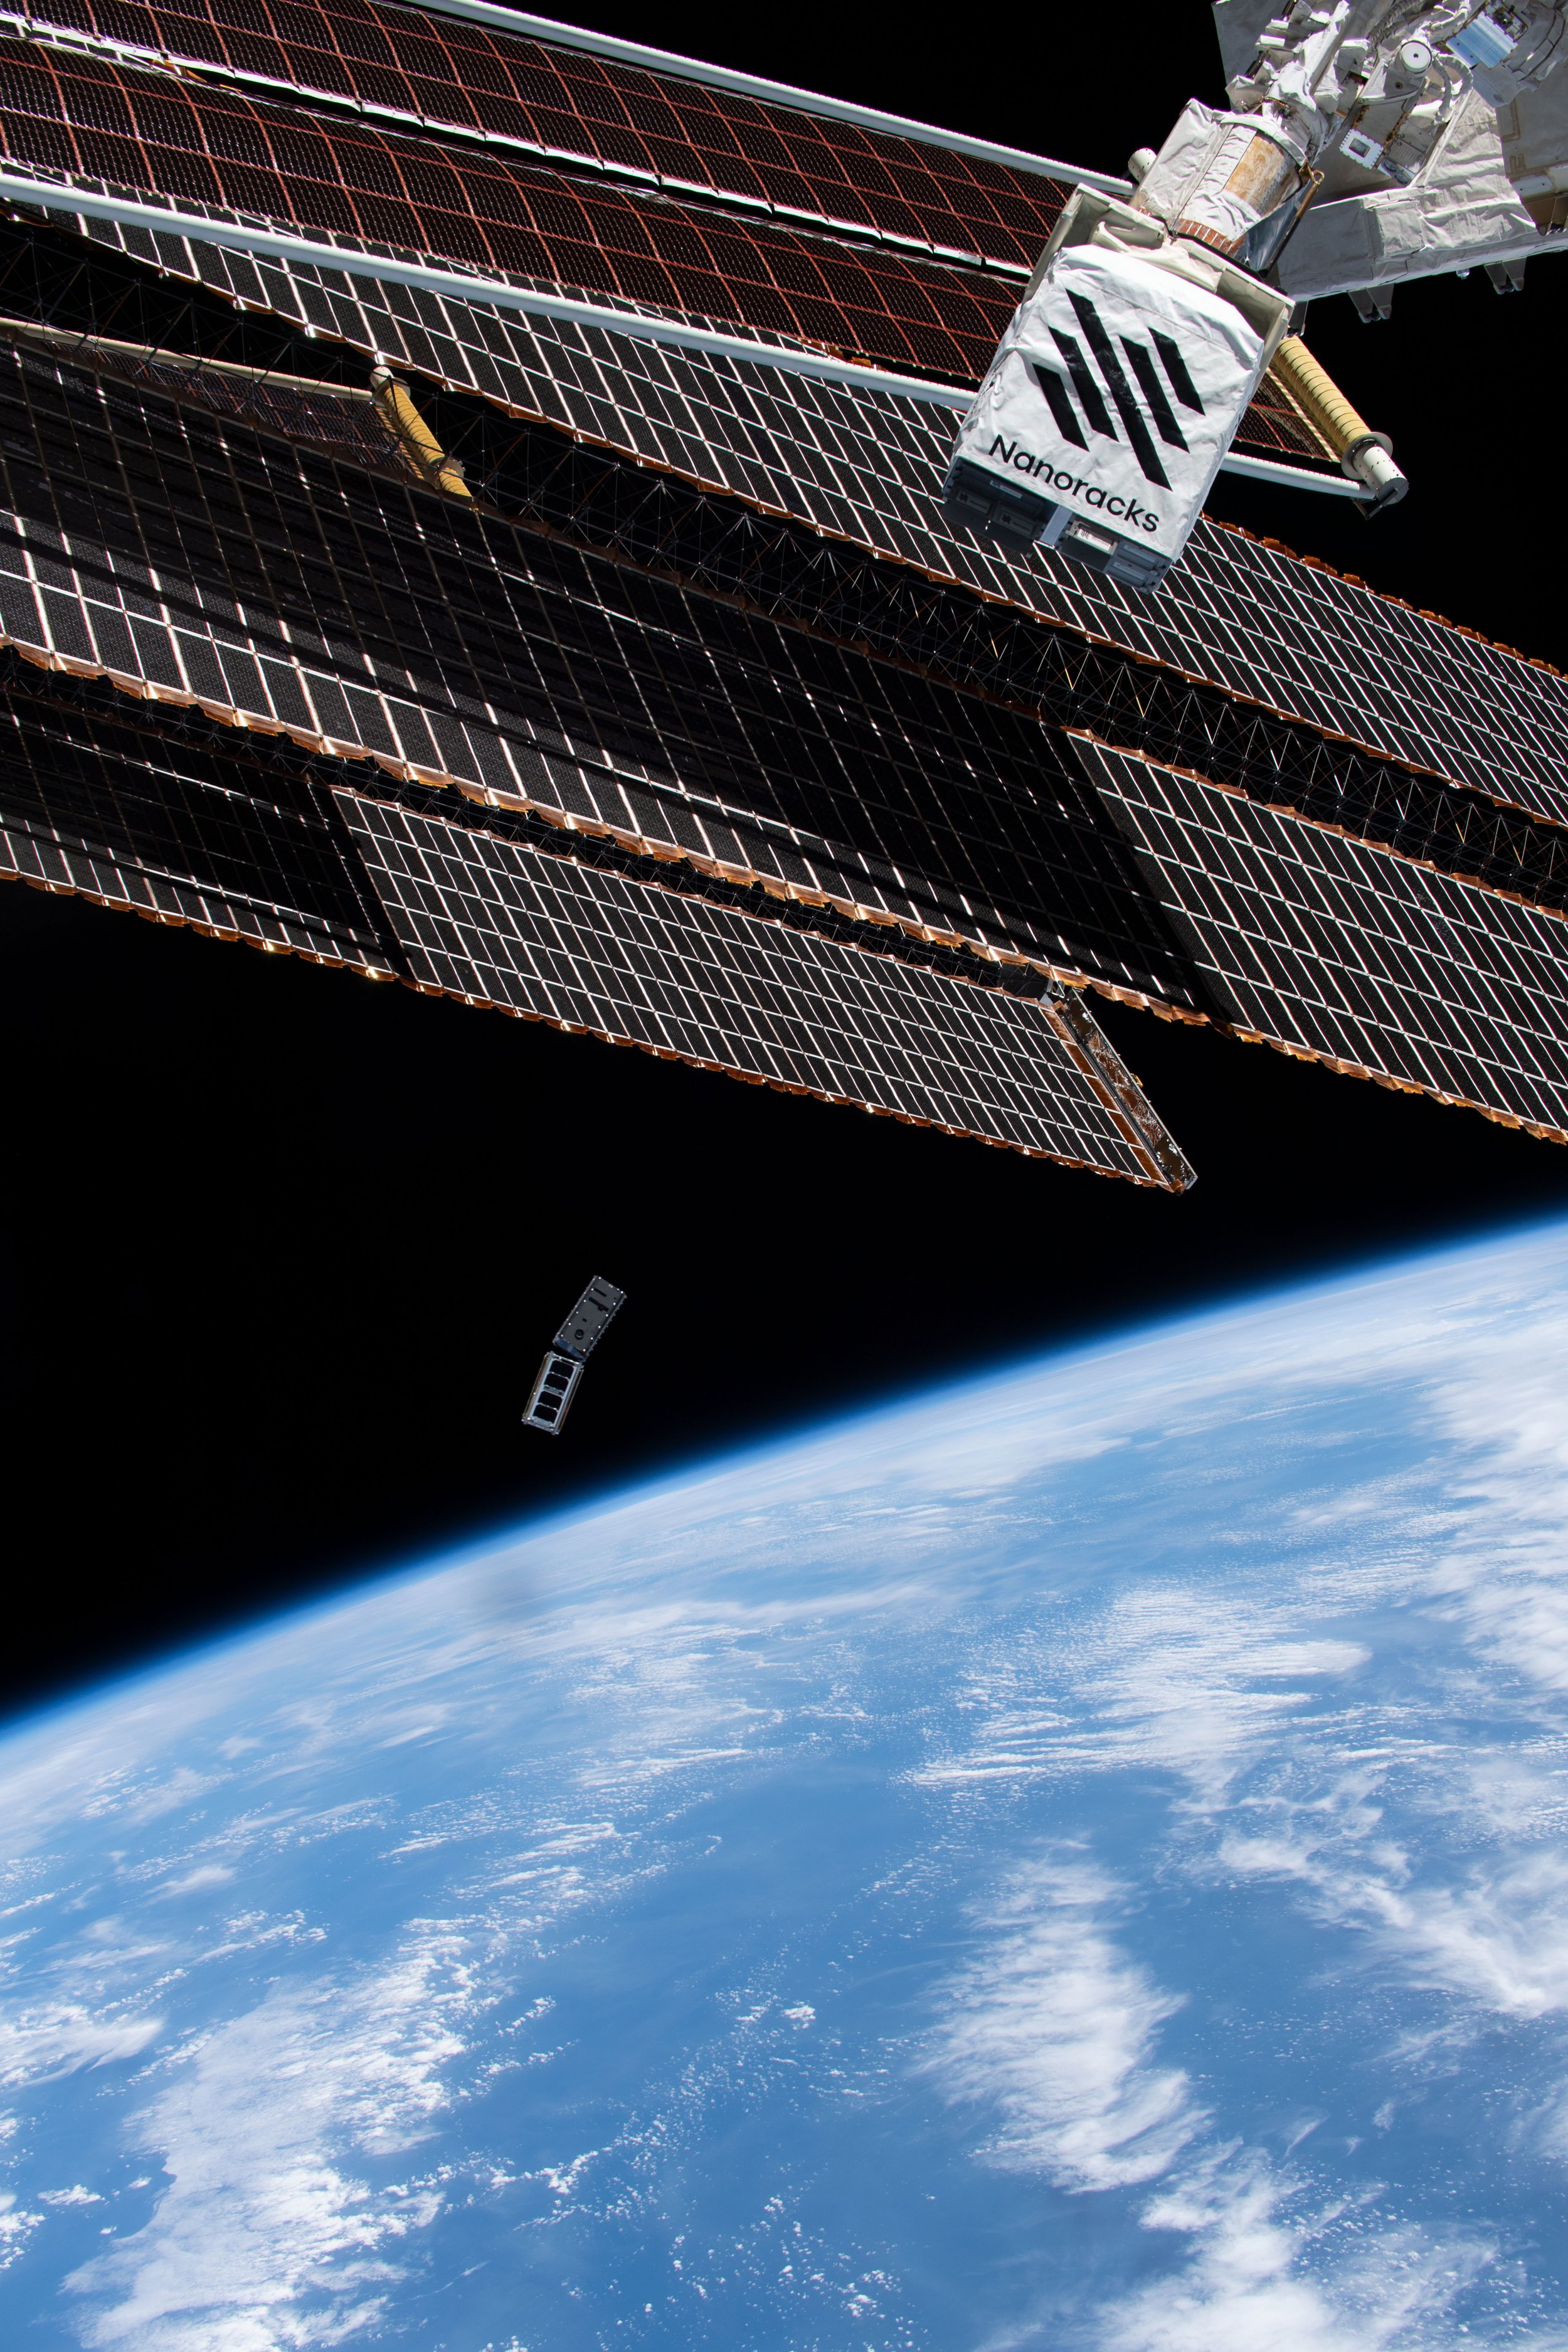 The ORCASat satellite being deployed into space, with Earth in the background